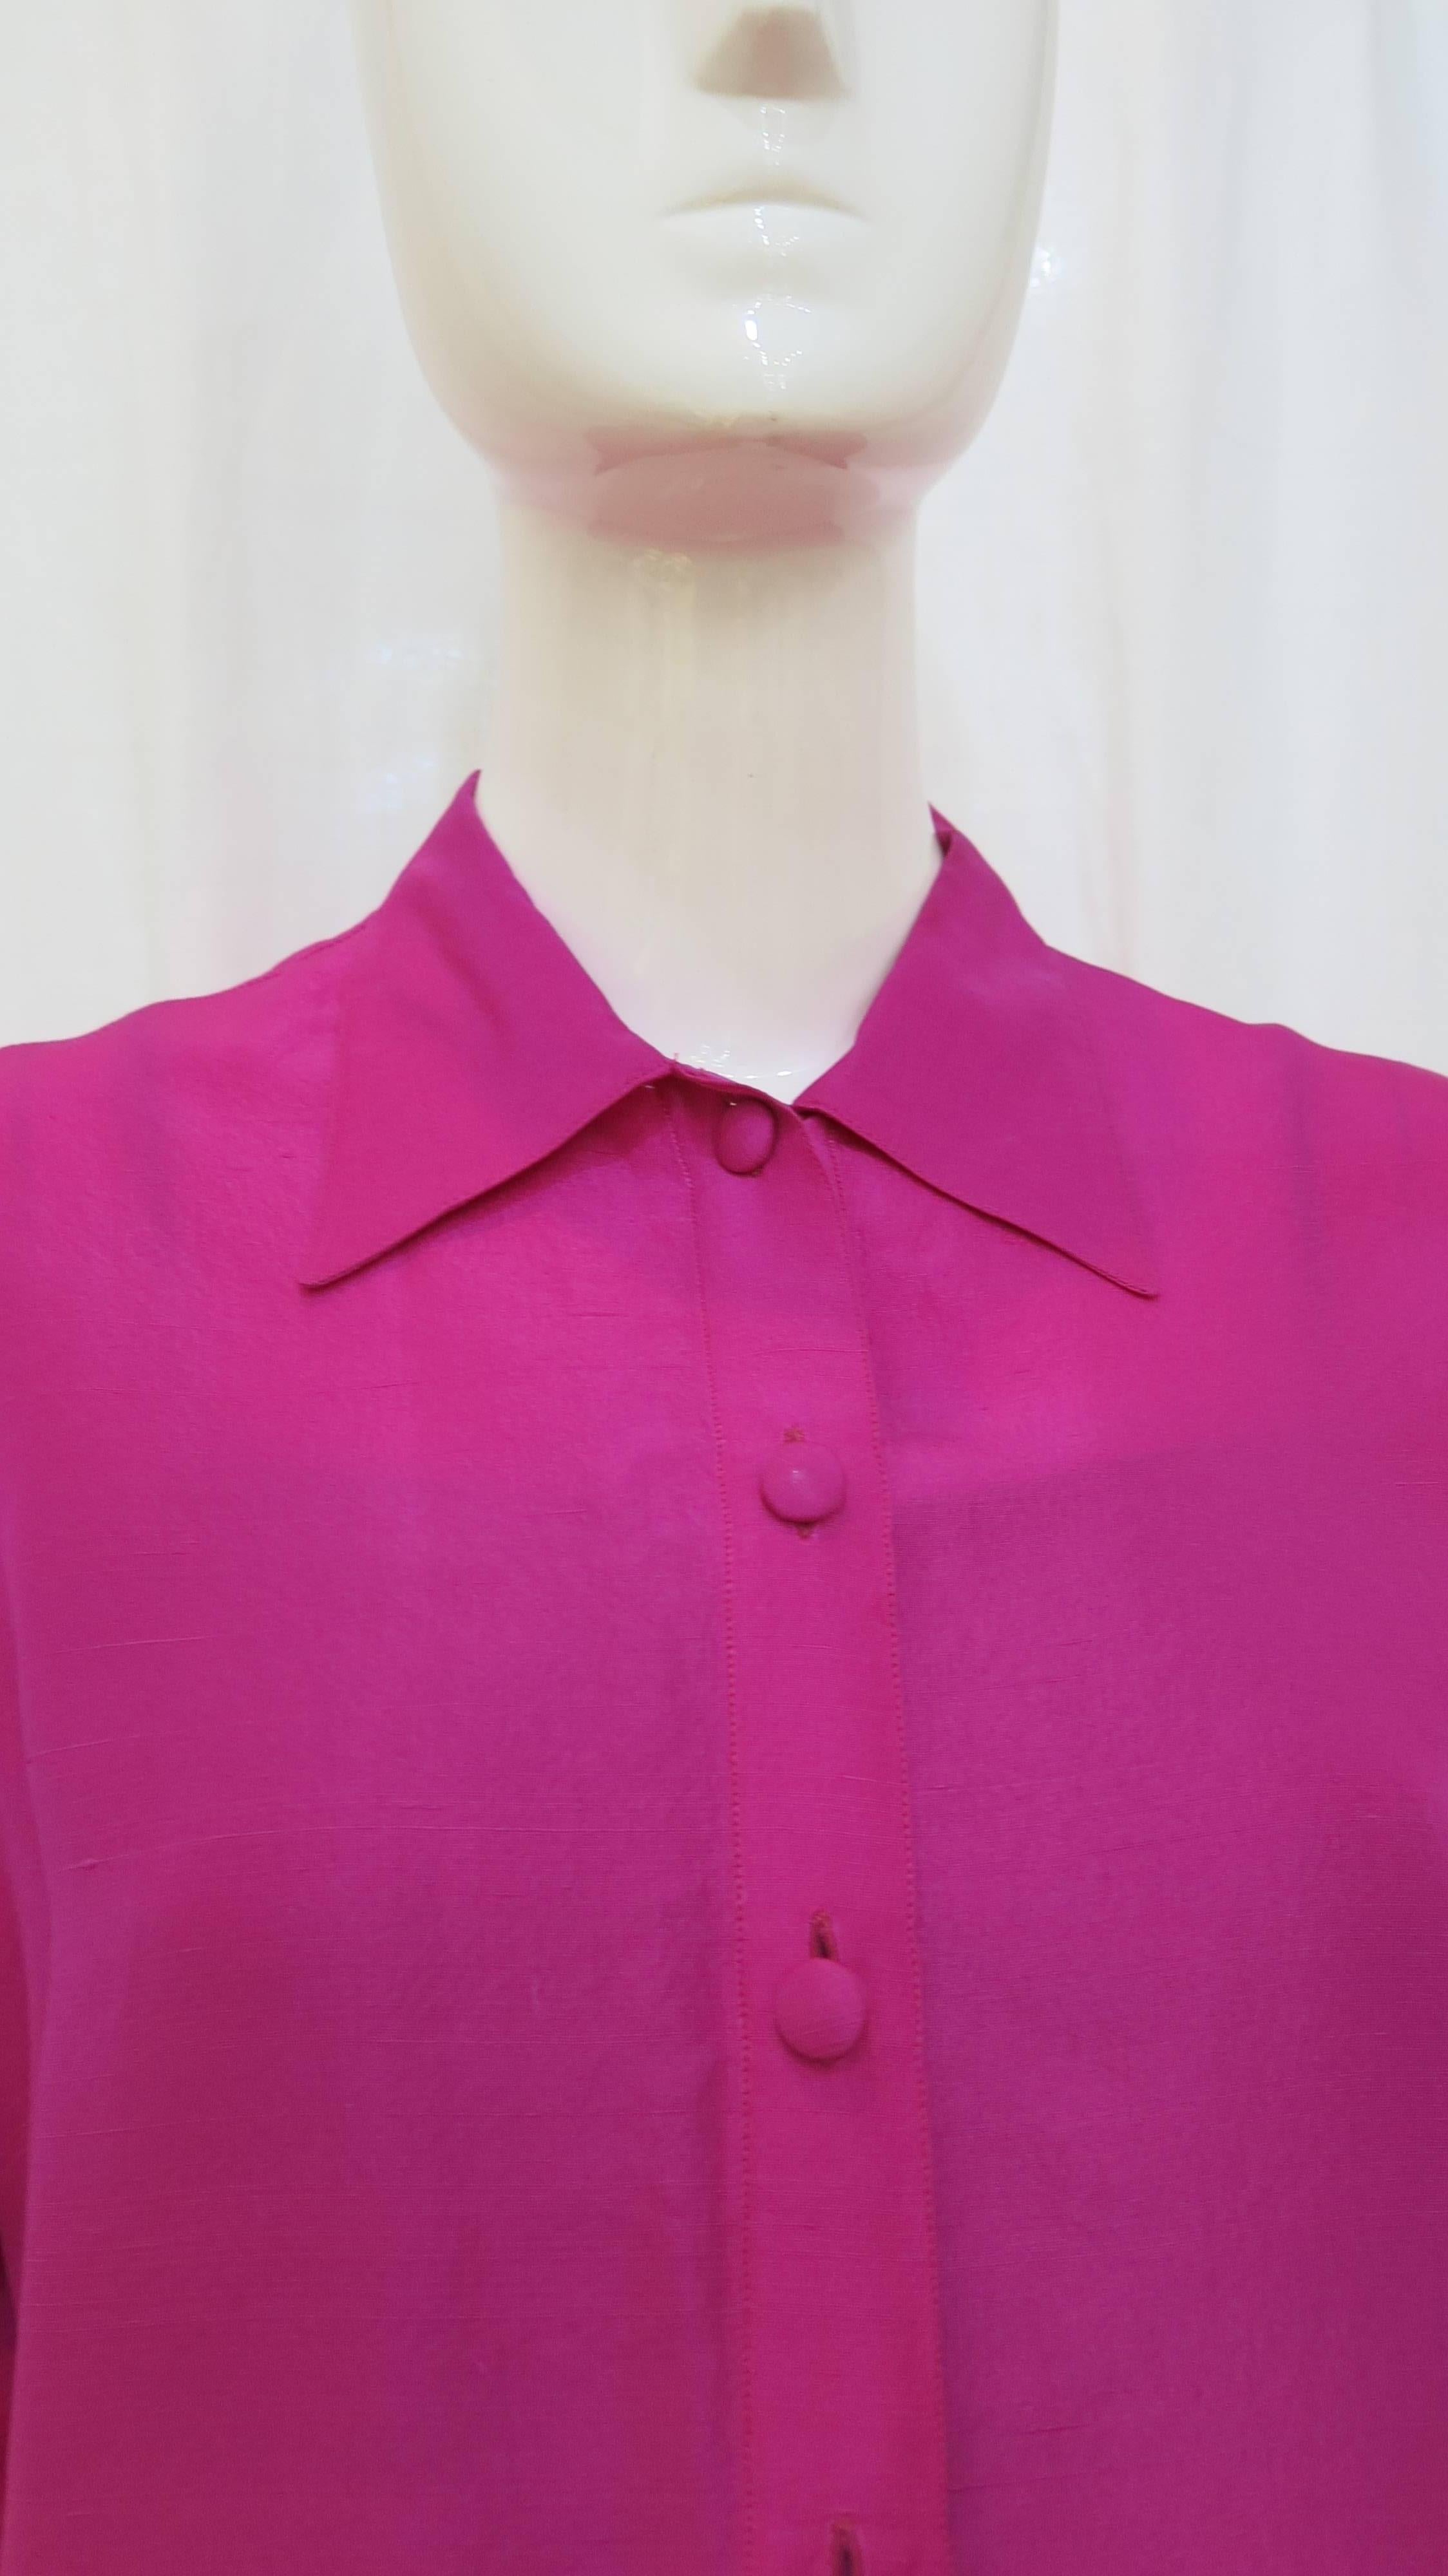 Vibrant pink button down silk blouse from favorite Patrick Kelly. Six button closure at the front of the garment. Nonconventional cuffs on the sleeves with invisible seam and cut outs where normally there would be buttons. A great staple piece to